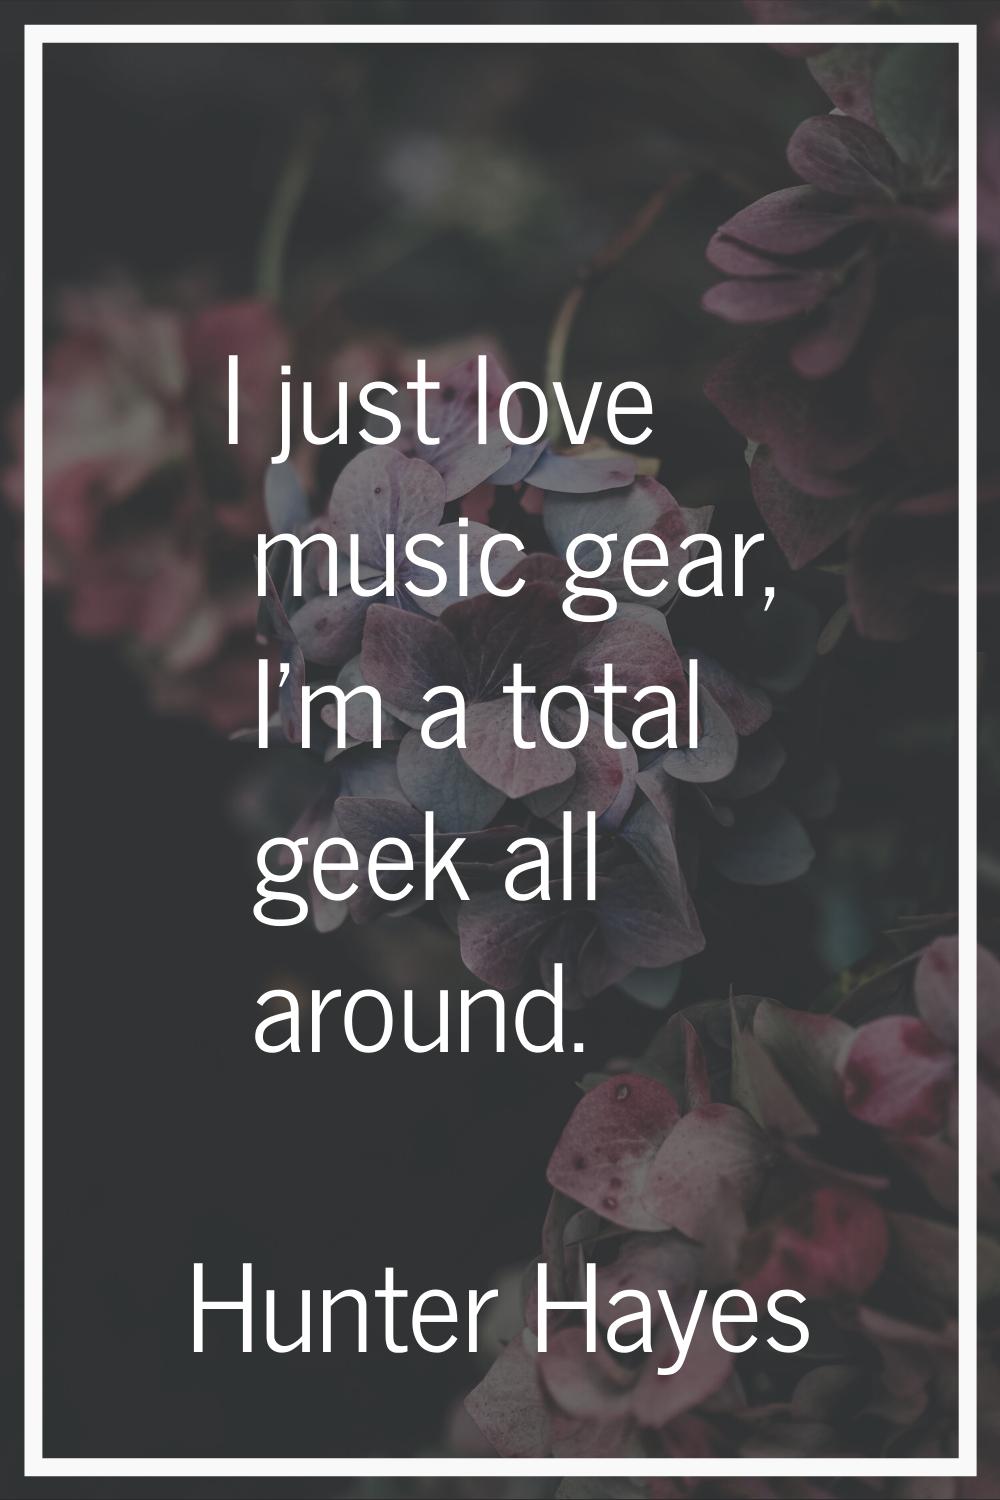 I just love music gear, I'm a total geek all around.